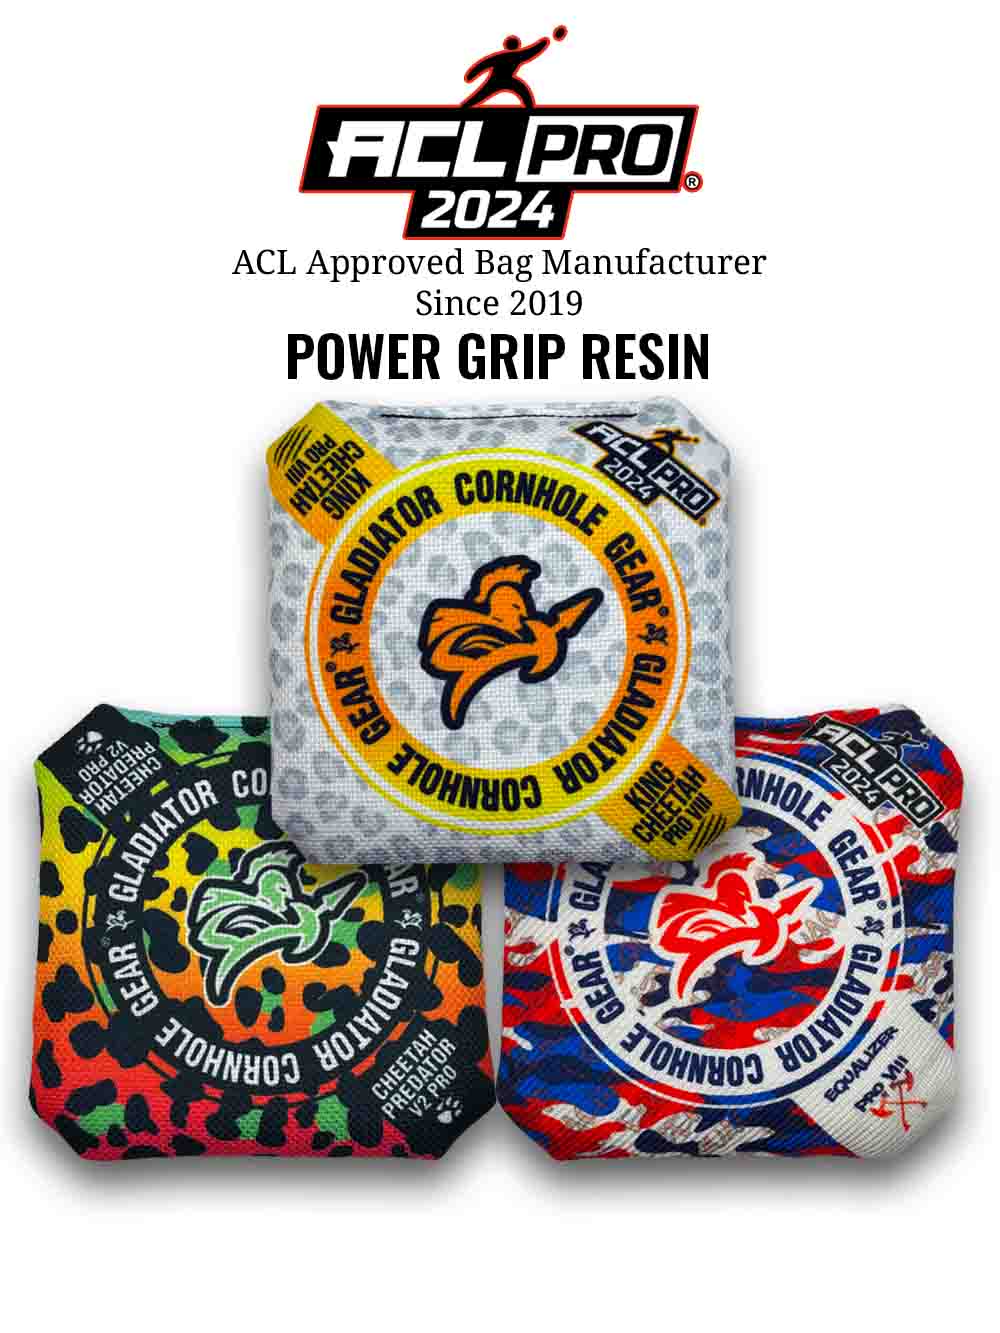 professional cornhole bags power grip resin acl bags as seen on espn ACL